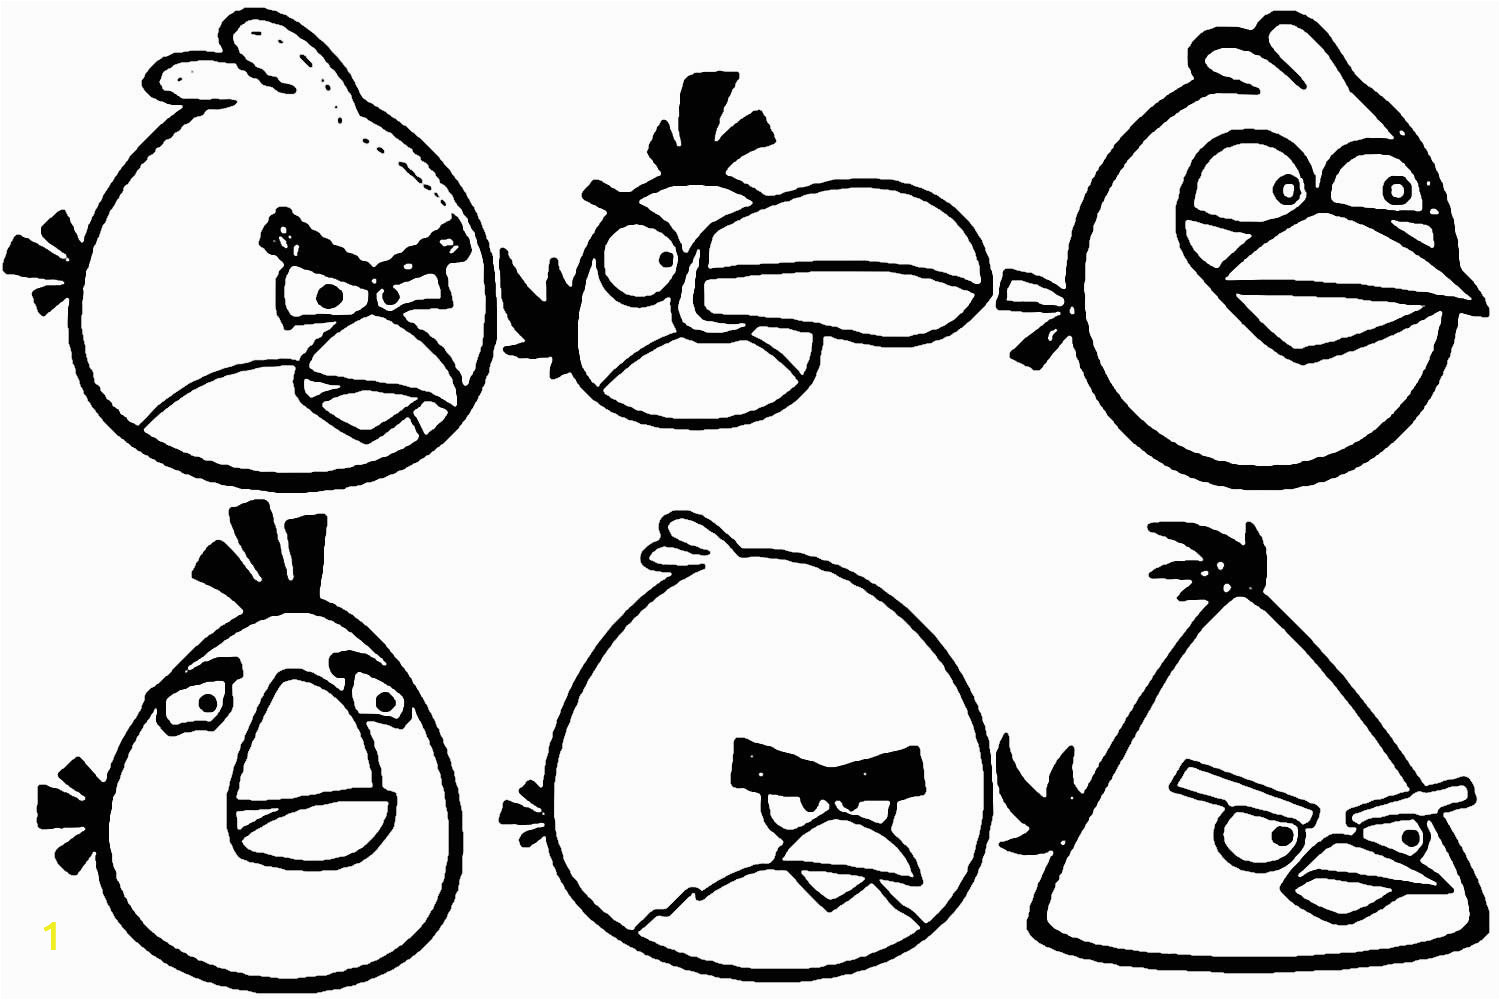 Angry Birds Coloring Pages for Kids Angry Birds Coloring Pages